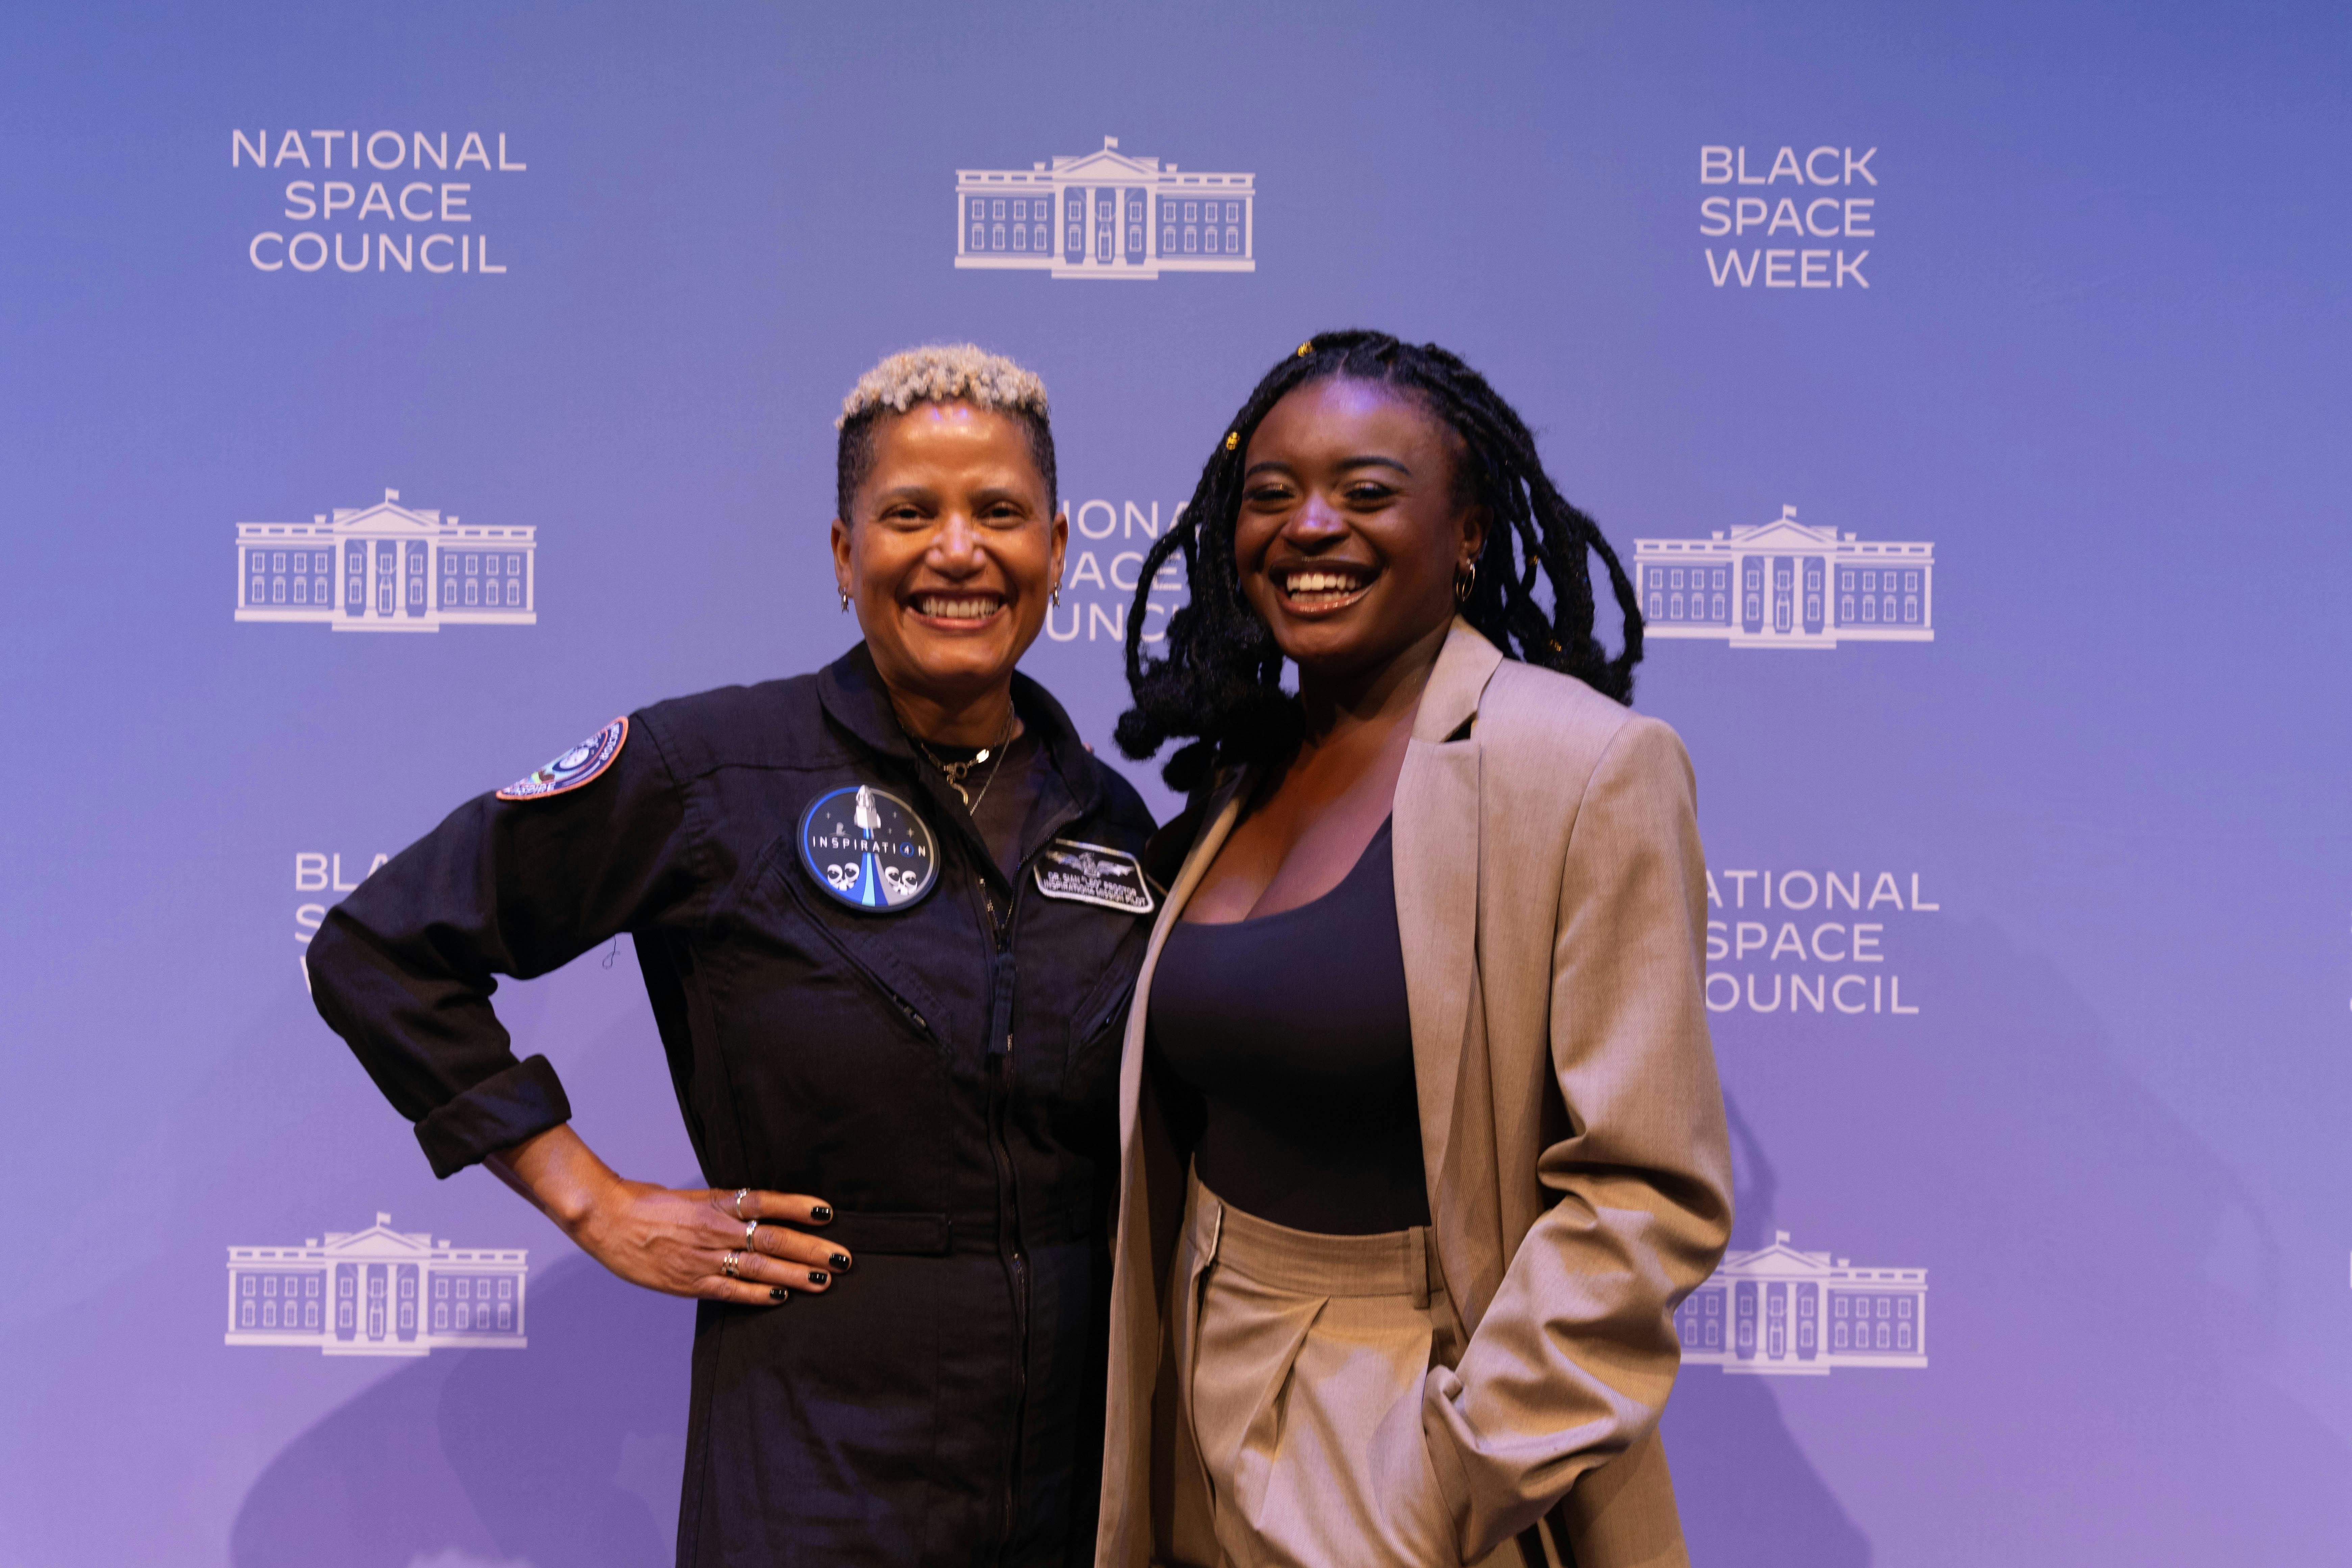 Black Space Week - White House National Space Council event